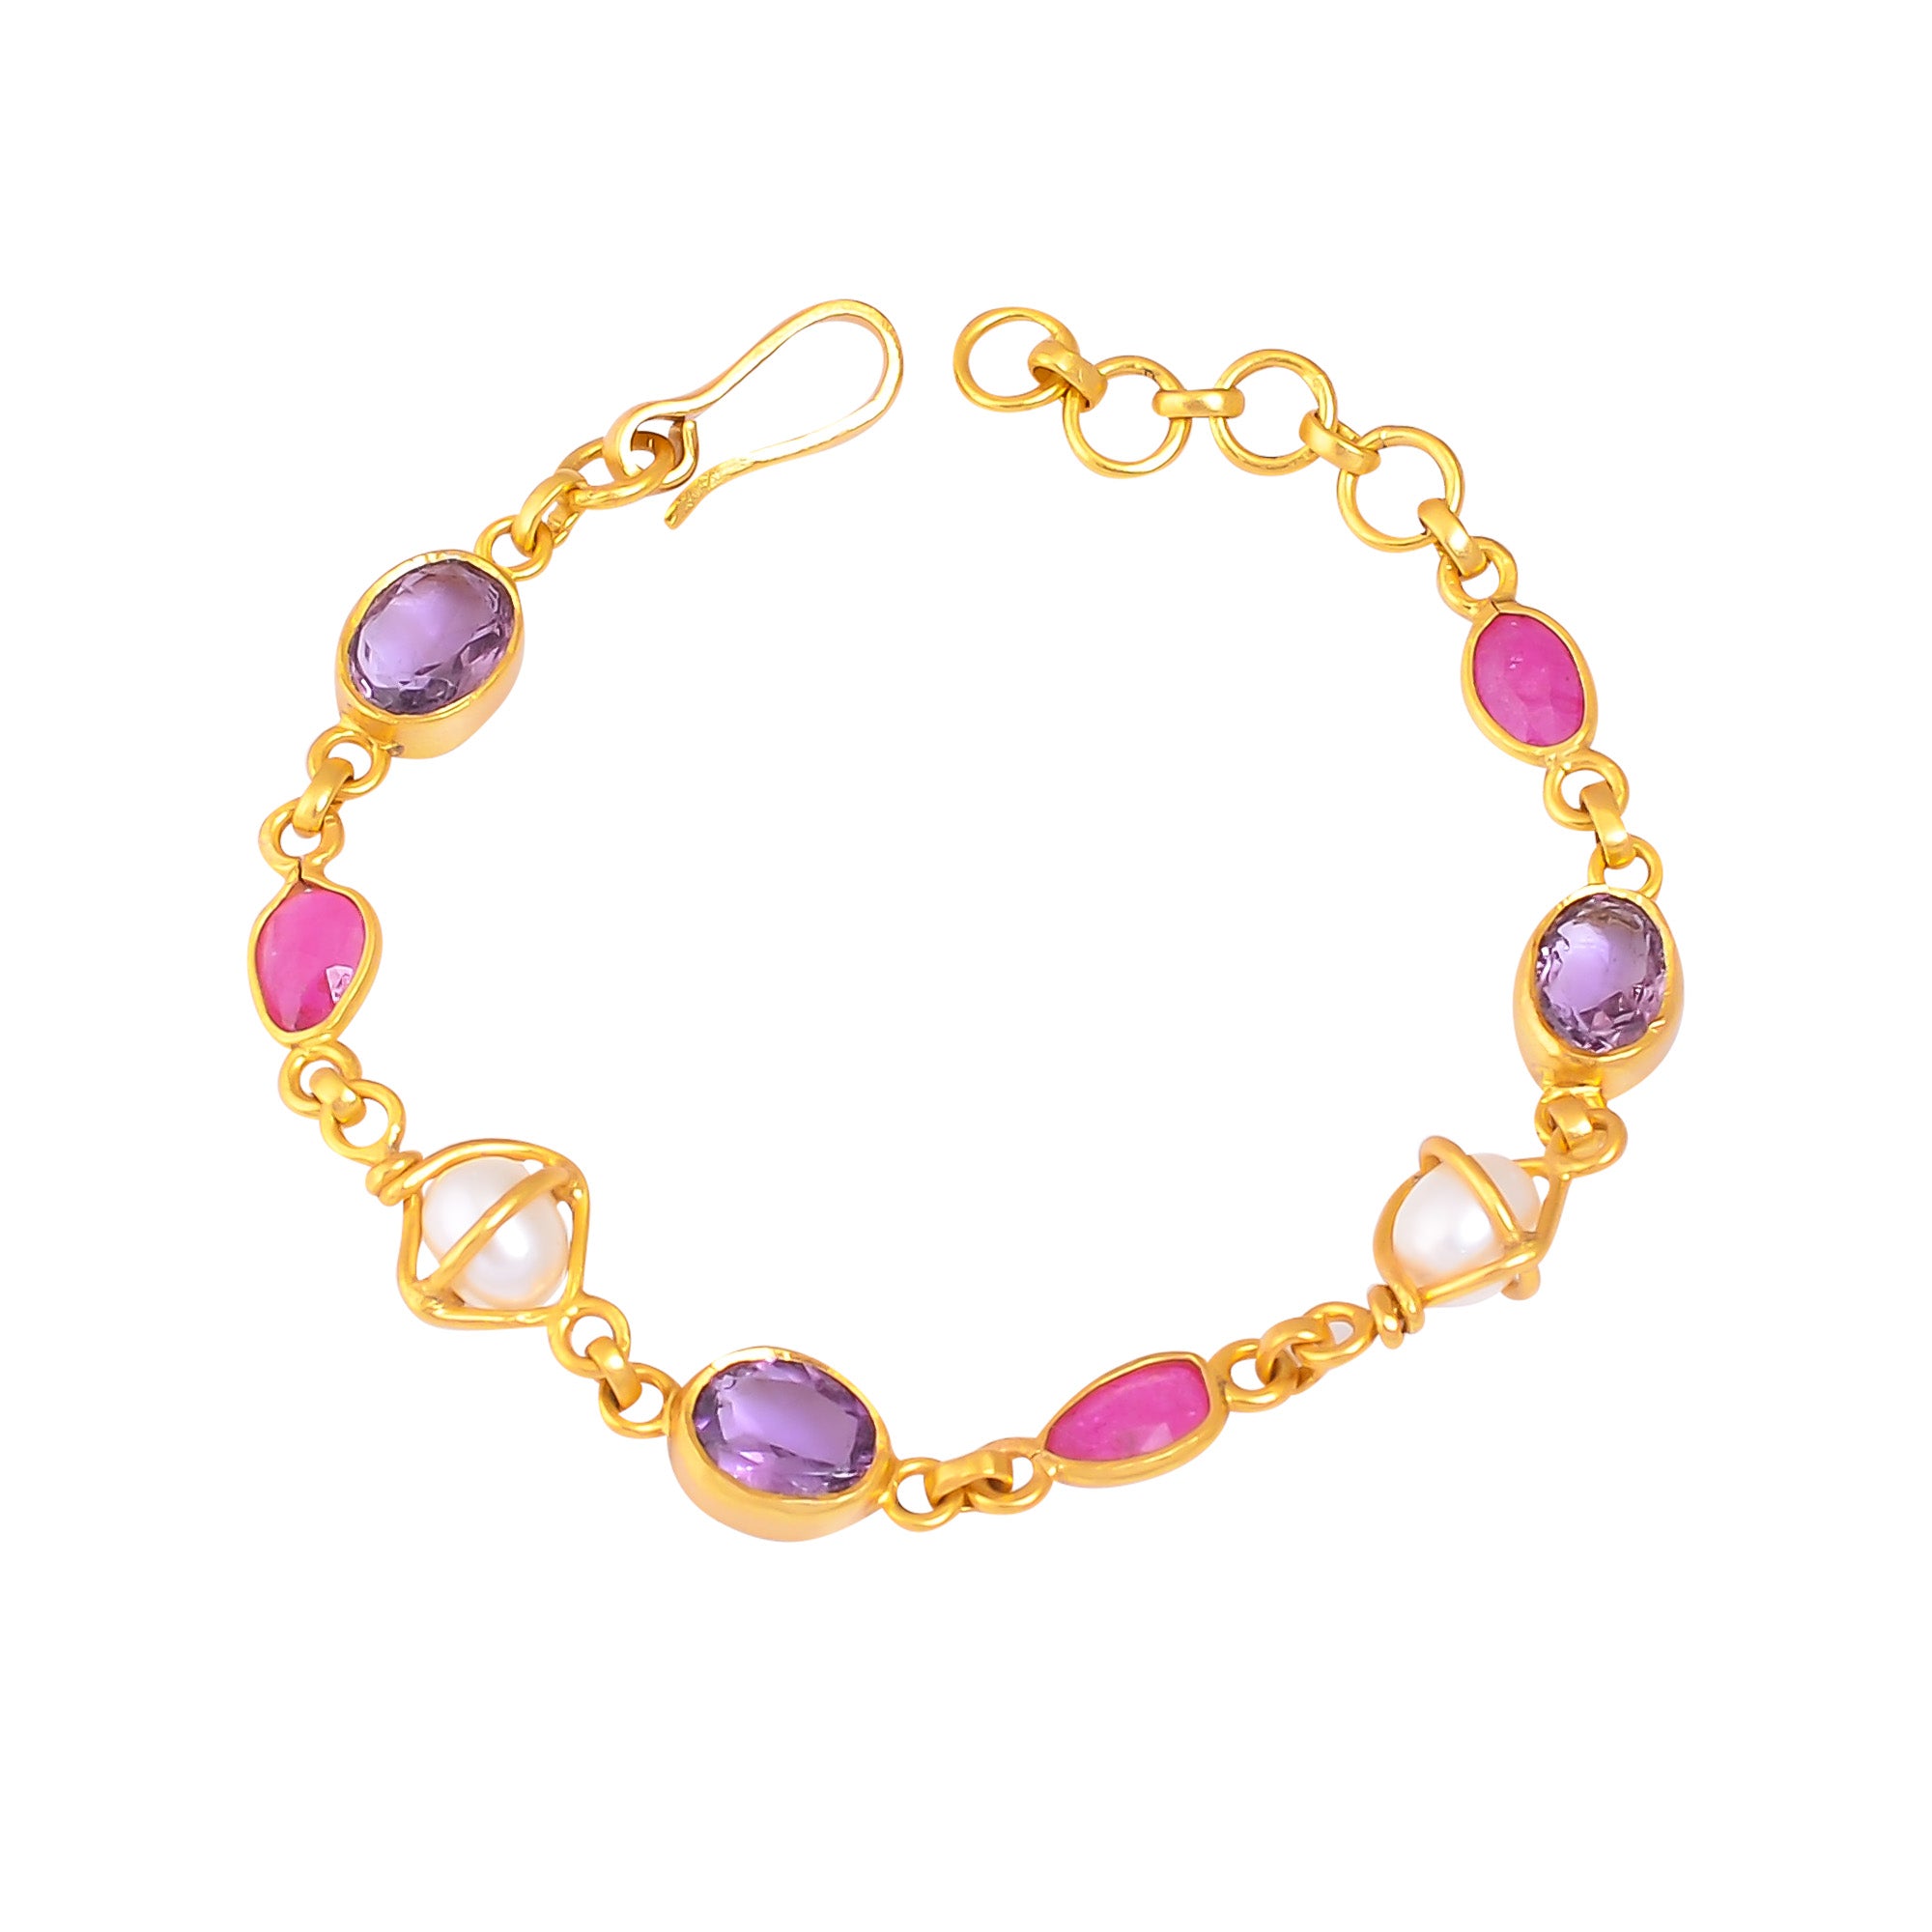 Buy Indian Handcrafted Silver Gold Plated Ruby/pearl/amethyst Bracelet